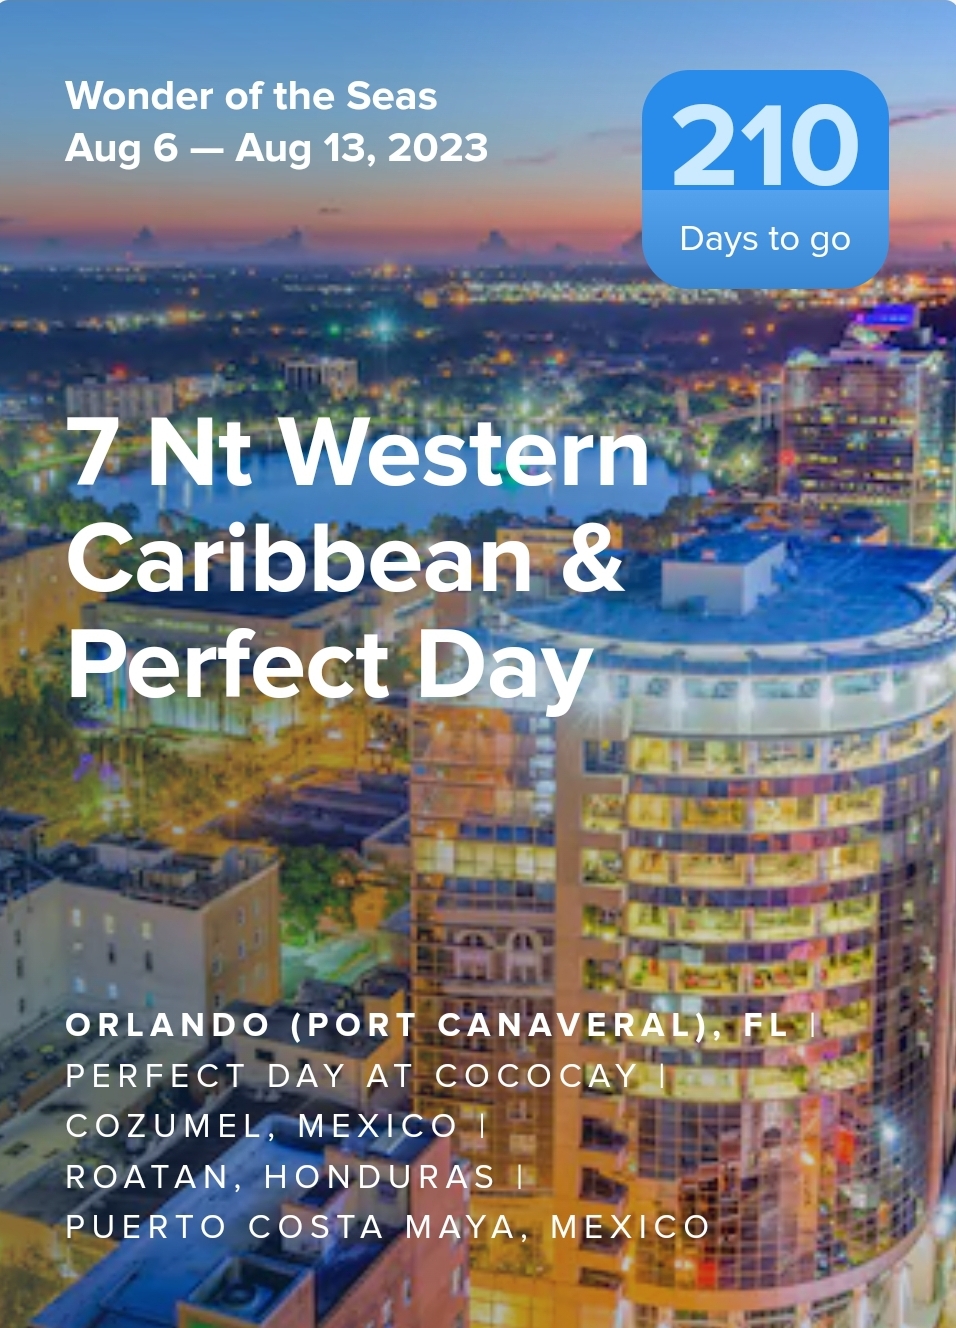 6 Night Western Caribbean & Perfect Day